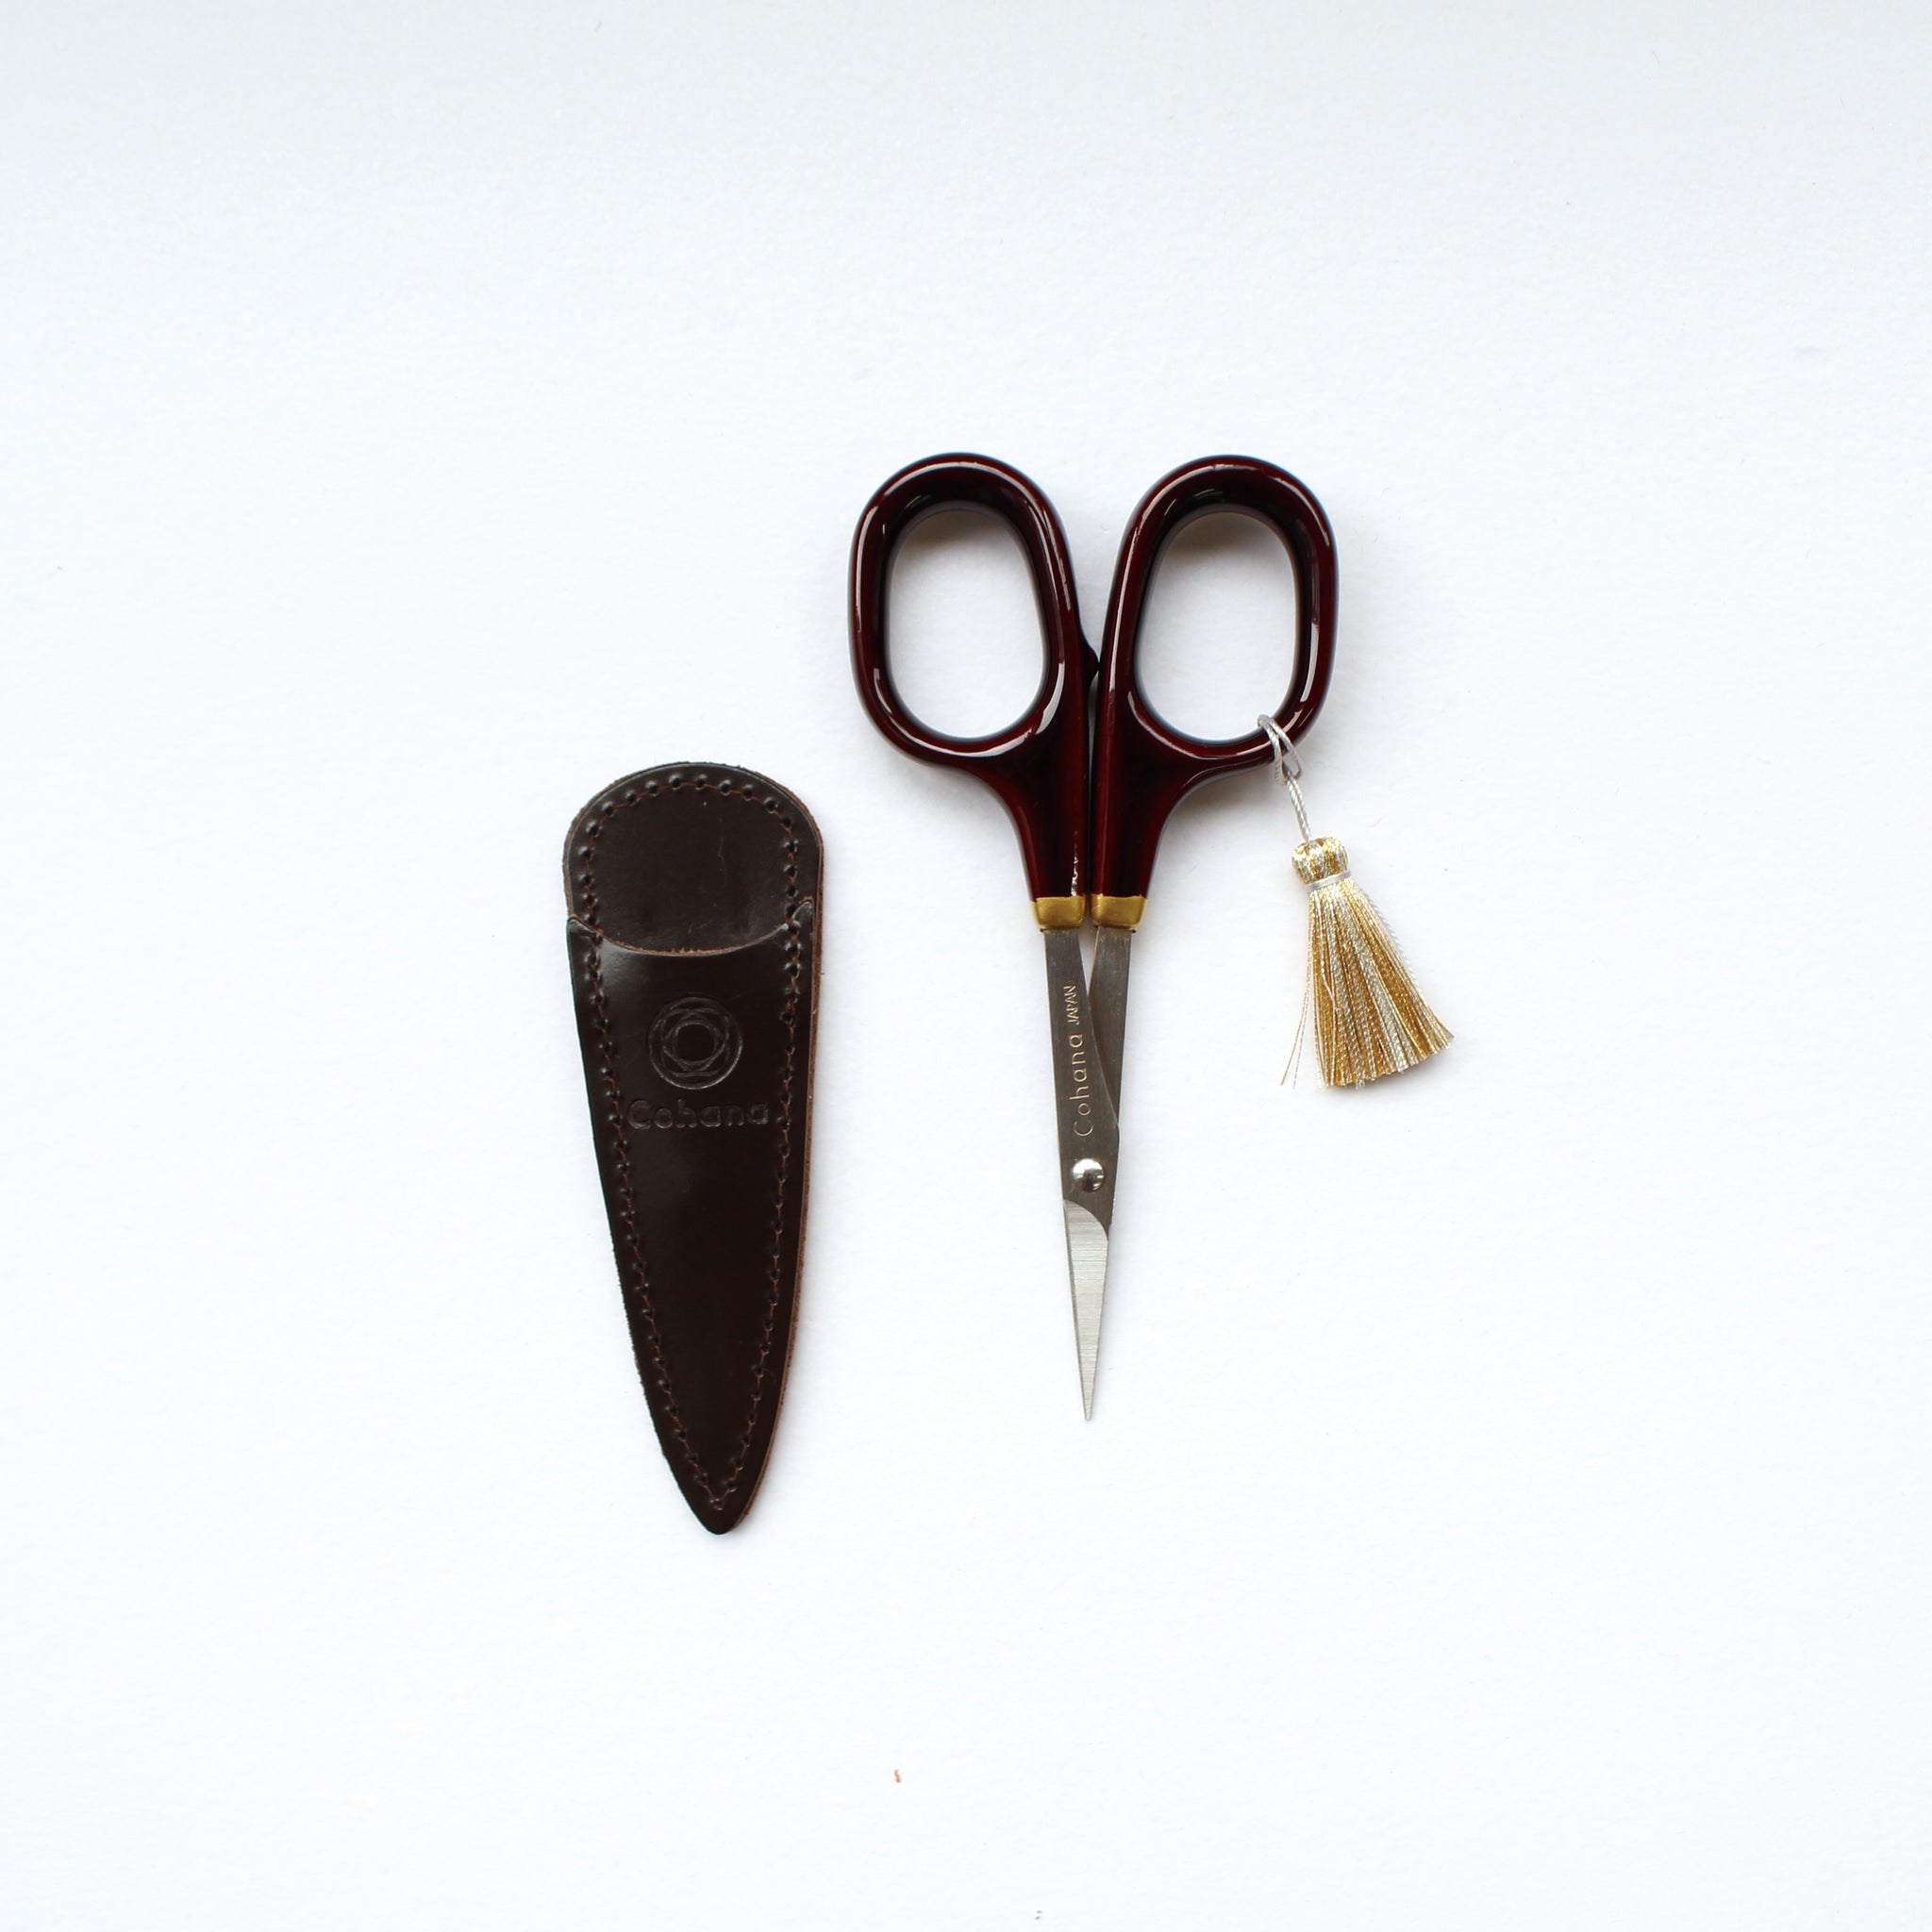 Cohana Small Scissors with lacquer handles + gold trim (Tamenuri-painting / Brown)